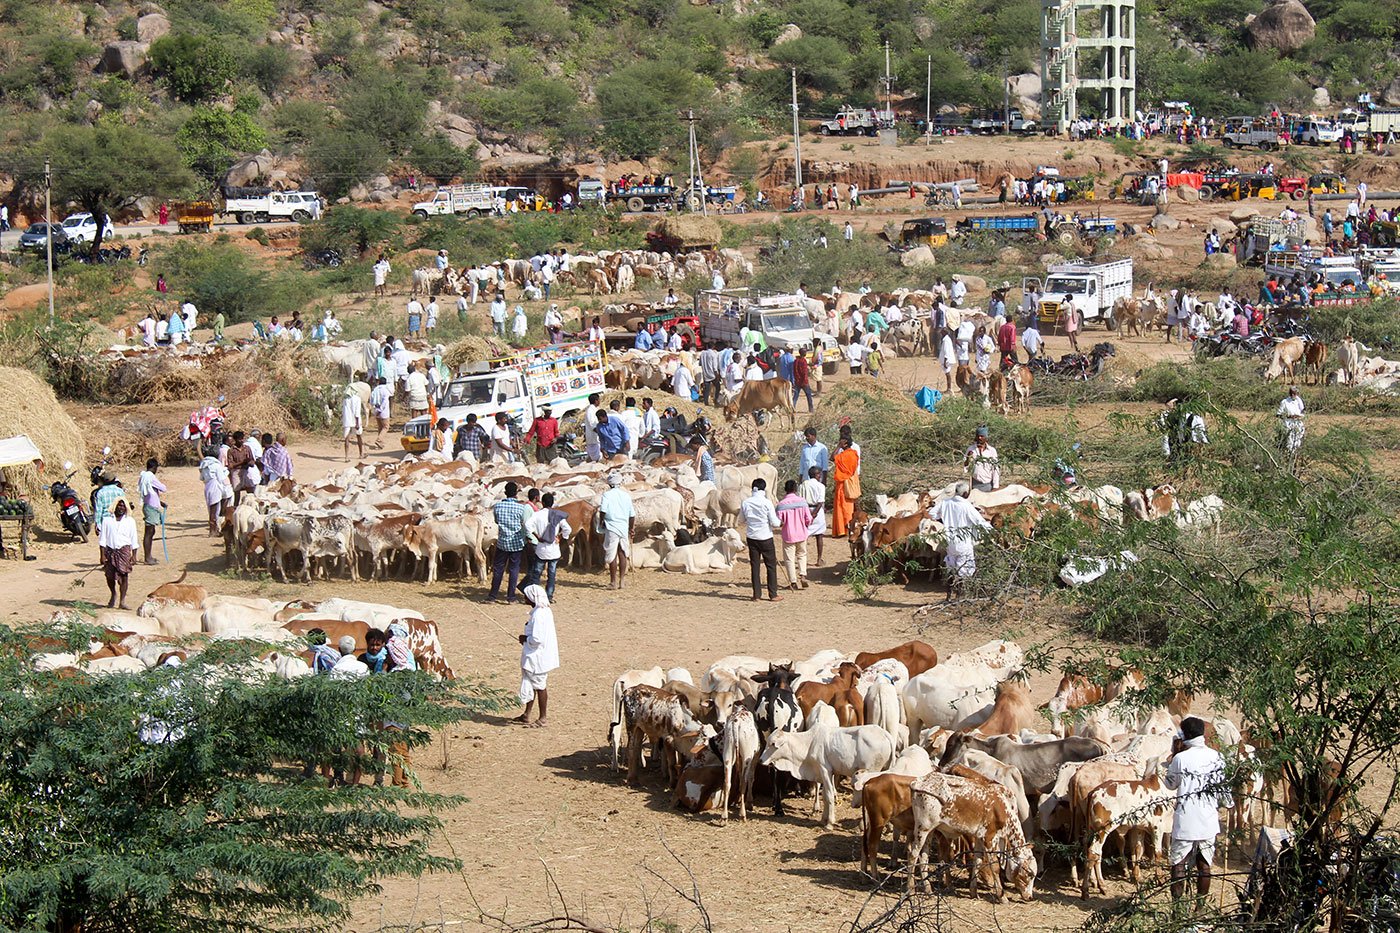 Herd of cattle, up for sale